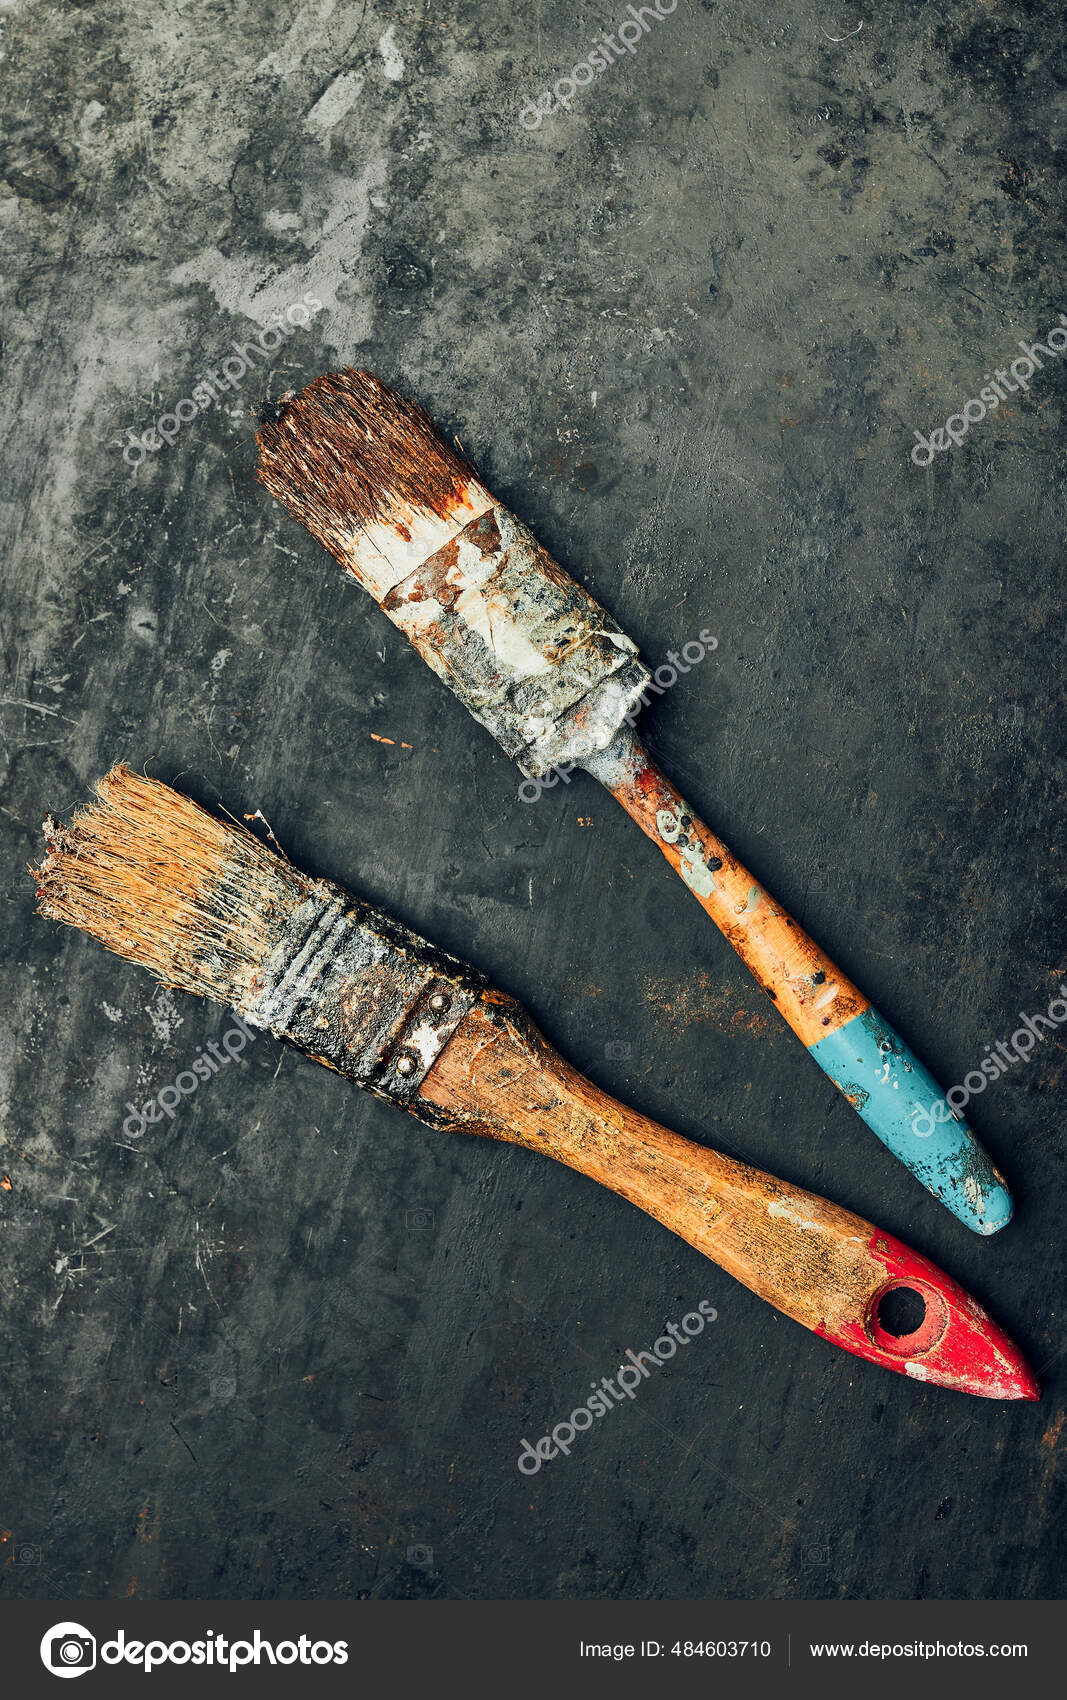 Paintbrushes - This Old House